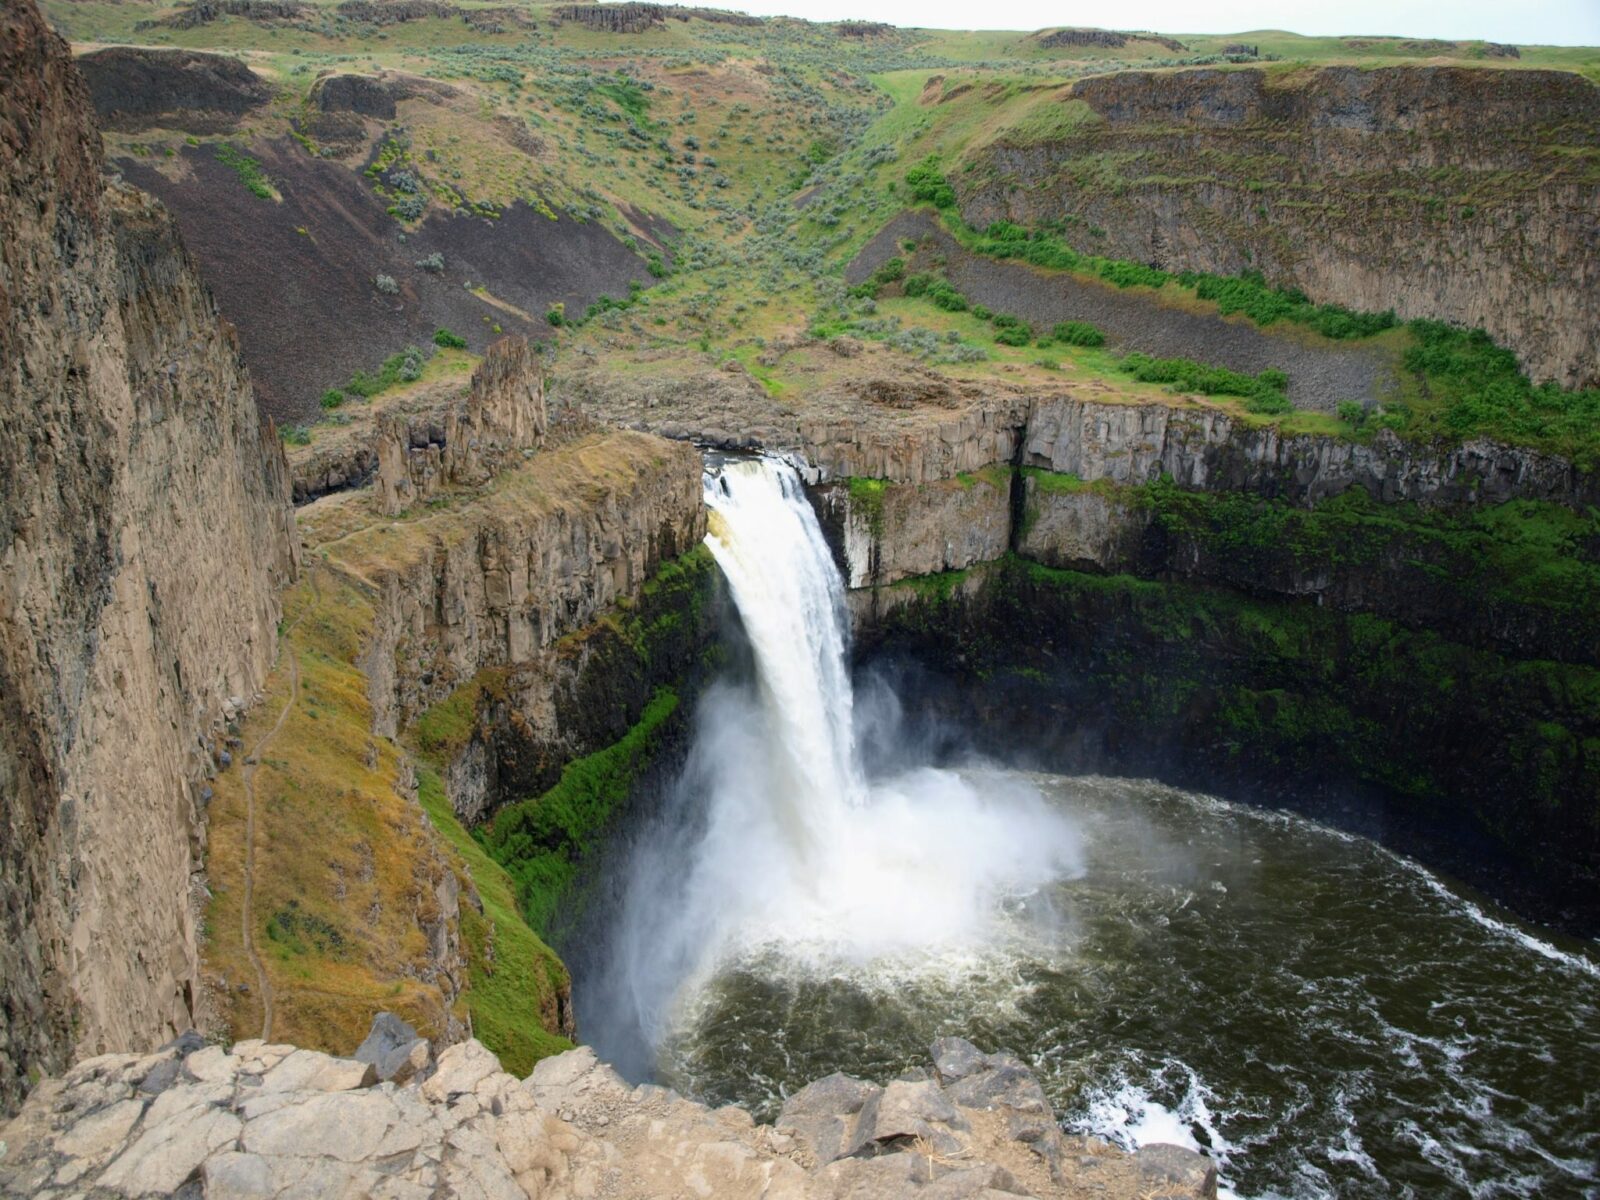 A high waterfall in washington state plunges down a straight rock wall into a pool. There are a few shrubs around on the otherwise dry land above it.